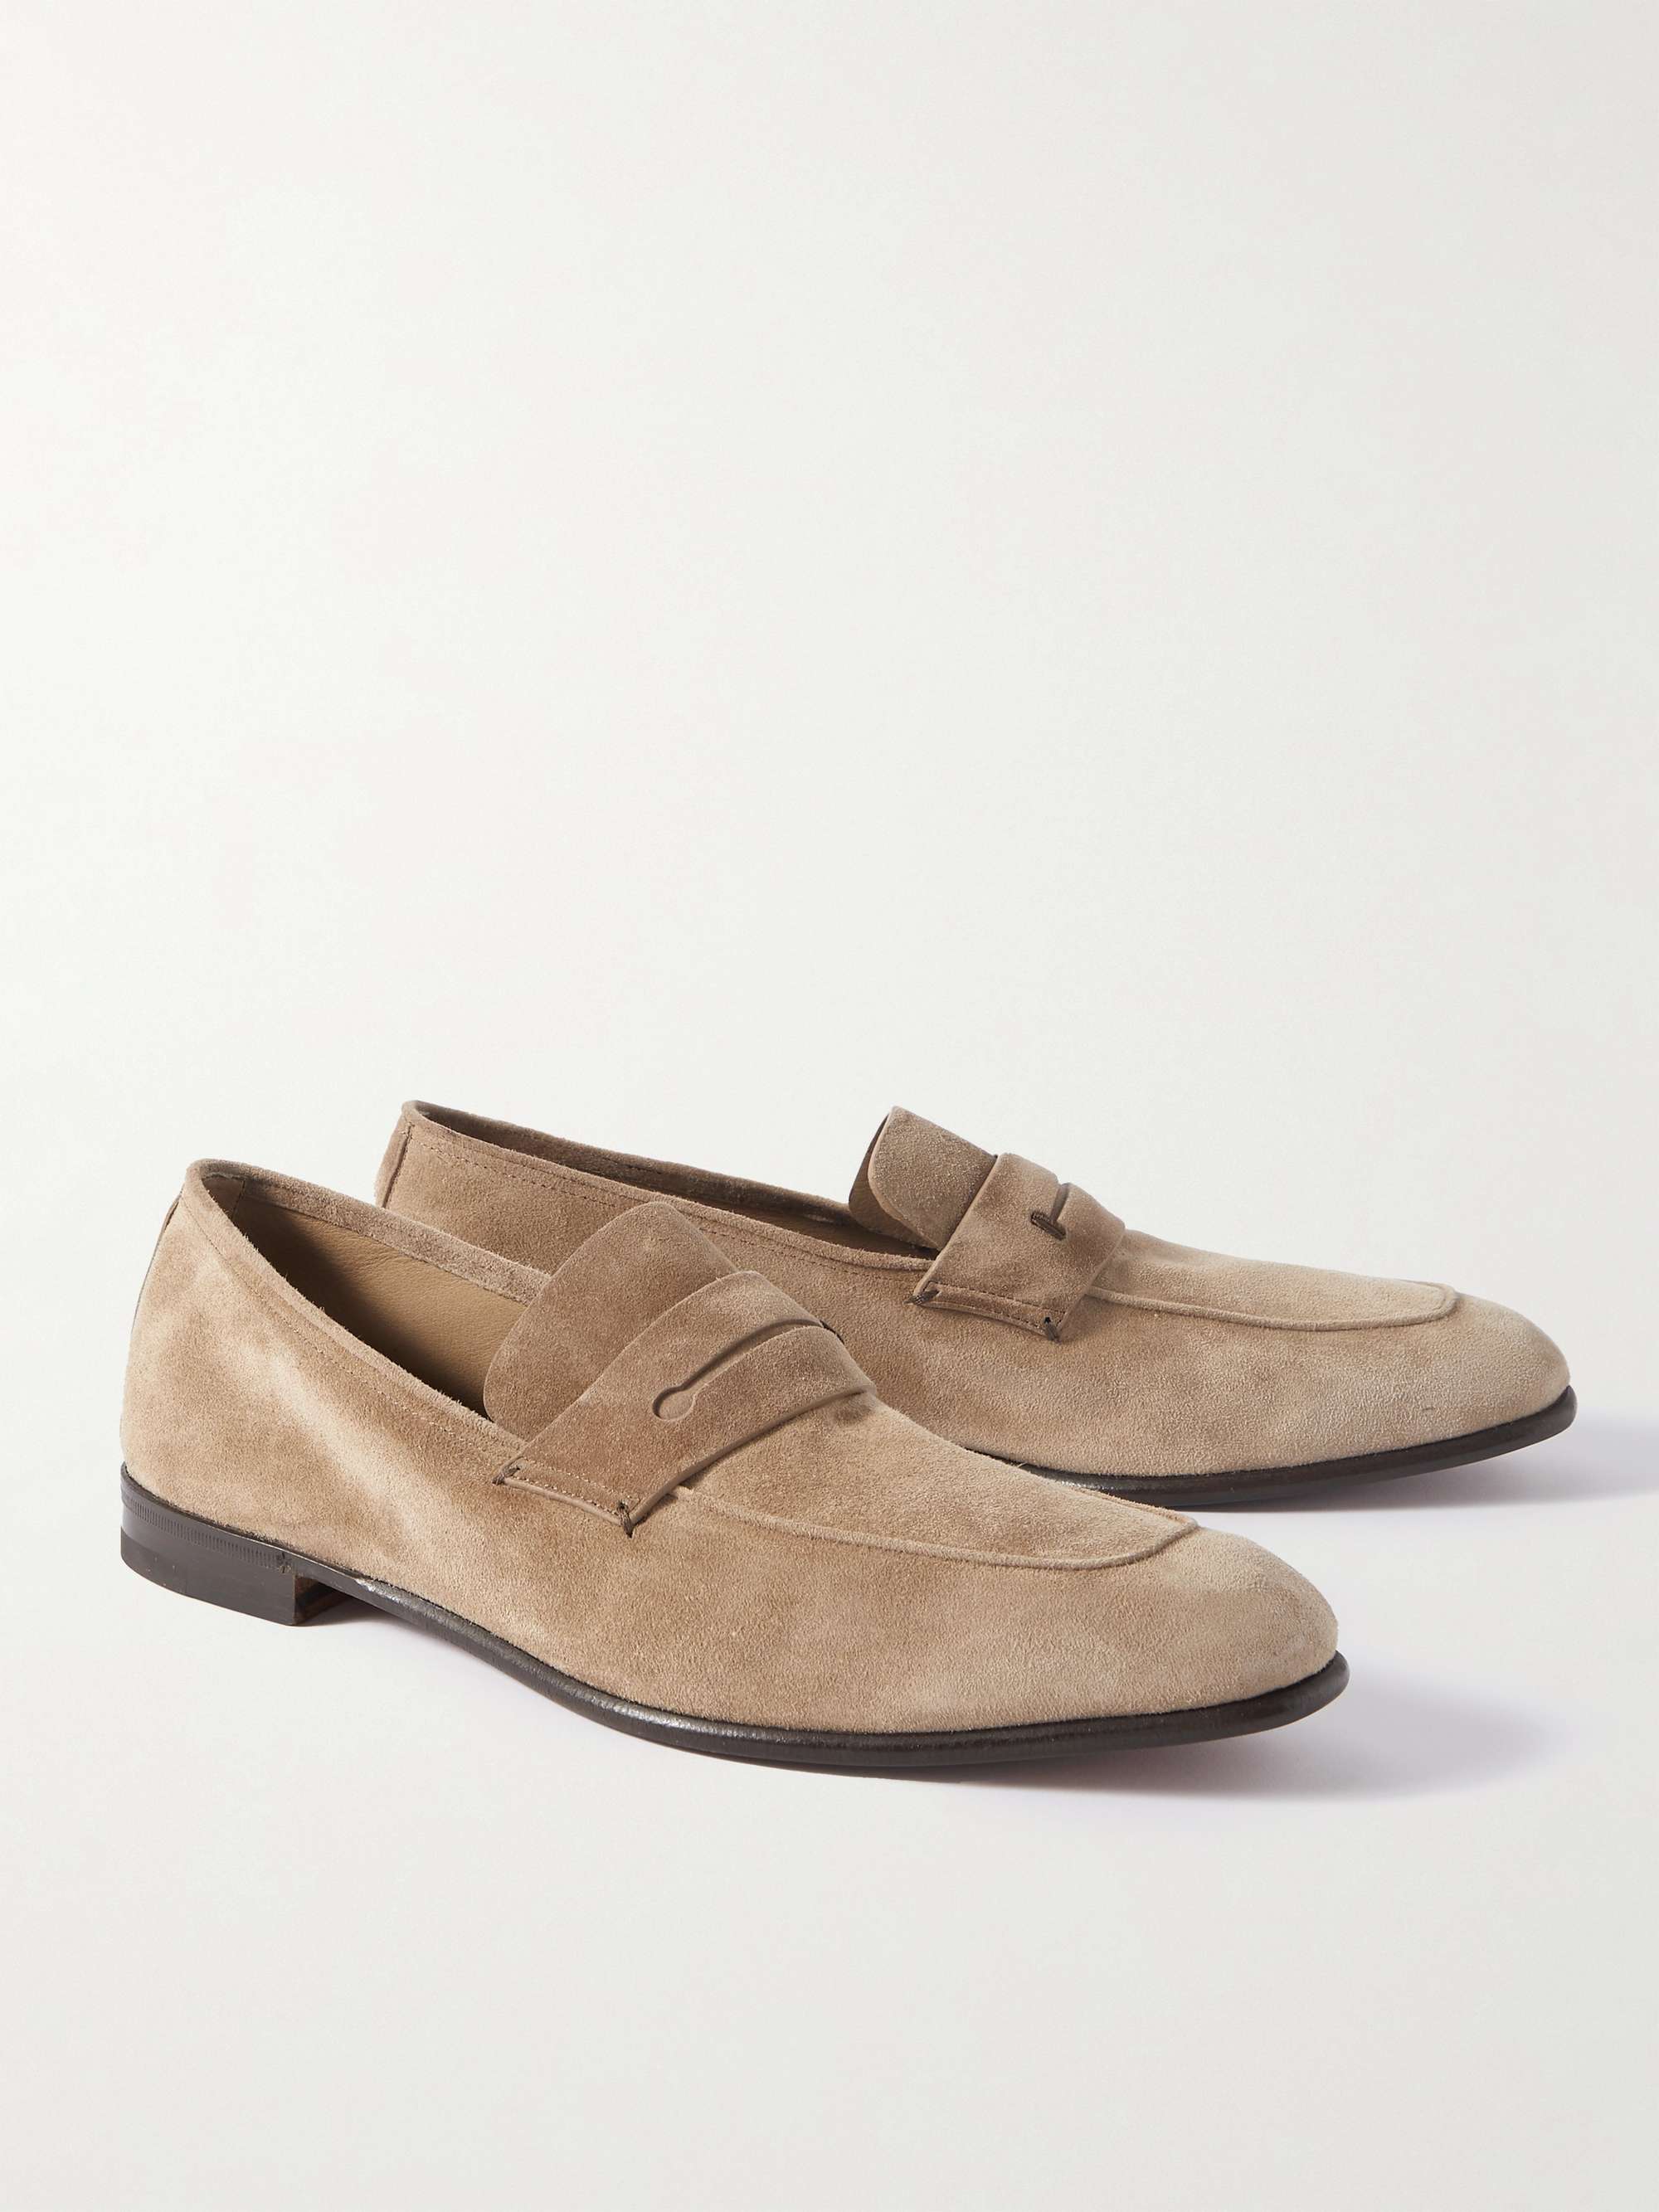 ZEGNA L'asola Suede Loafers